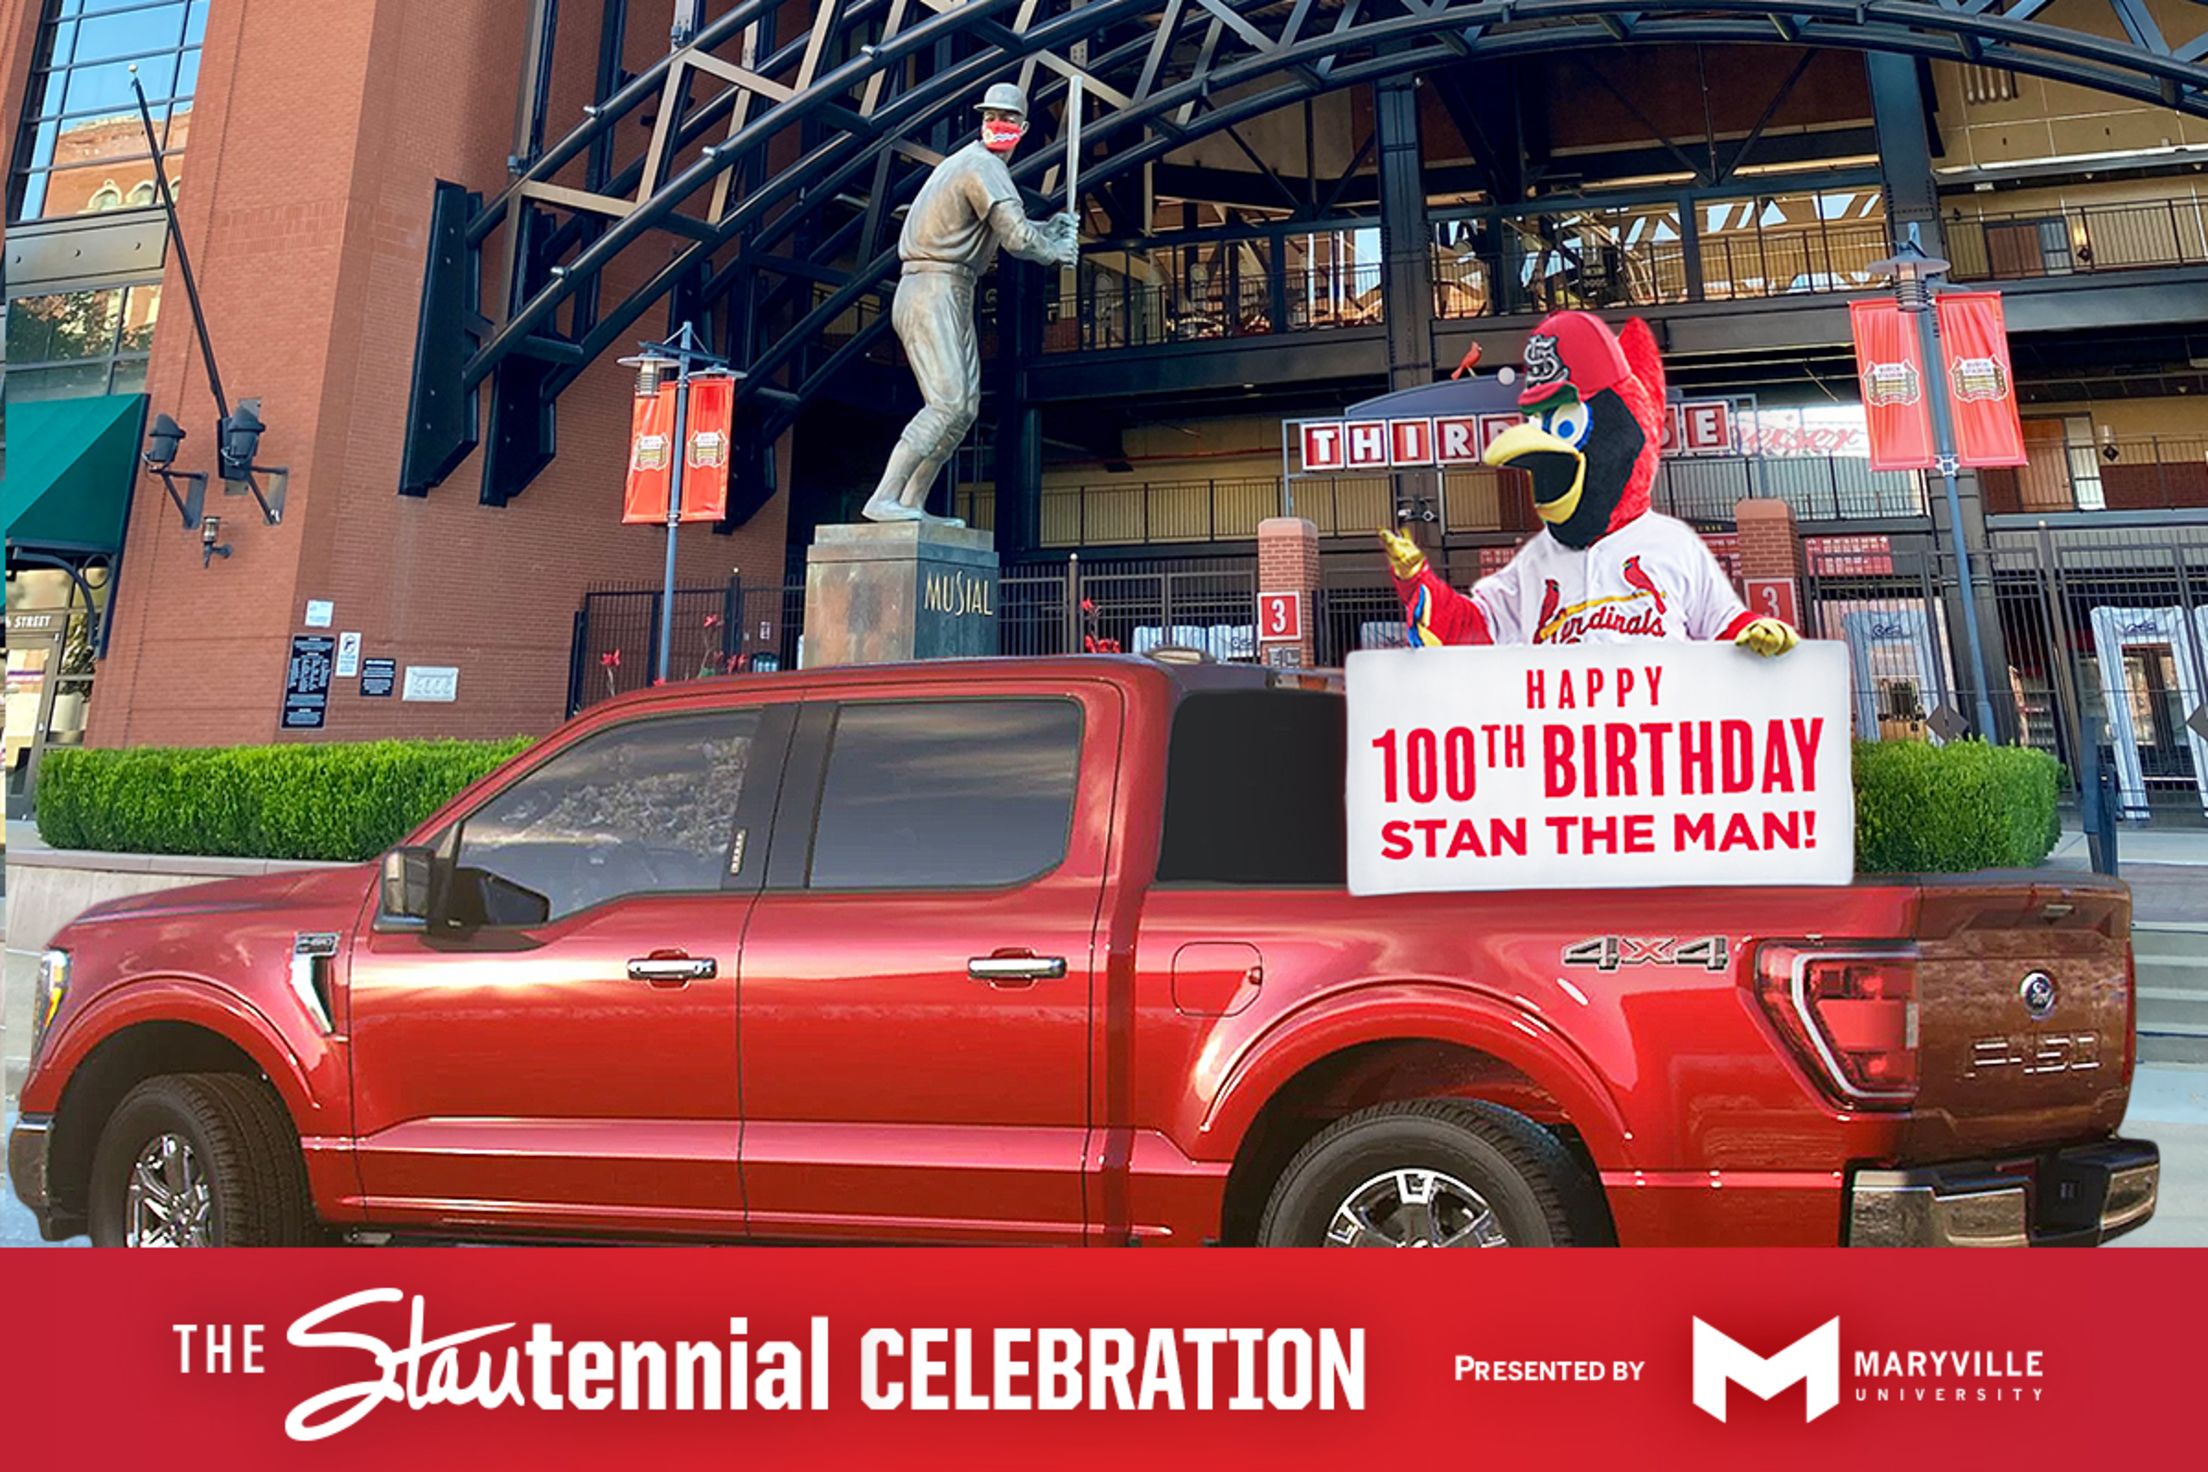 St. Louis Cardinals - Join us in wishing a Happy 31st Birthday to